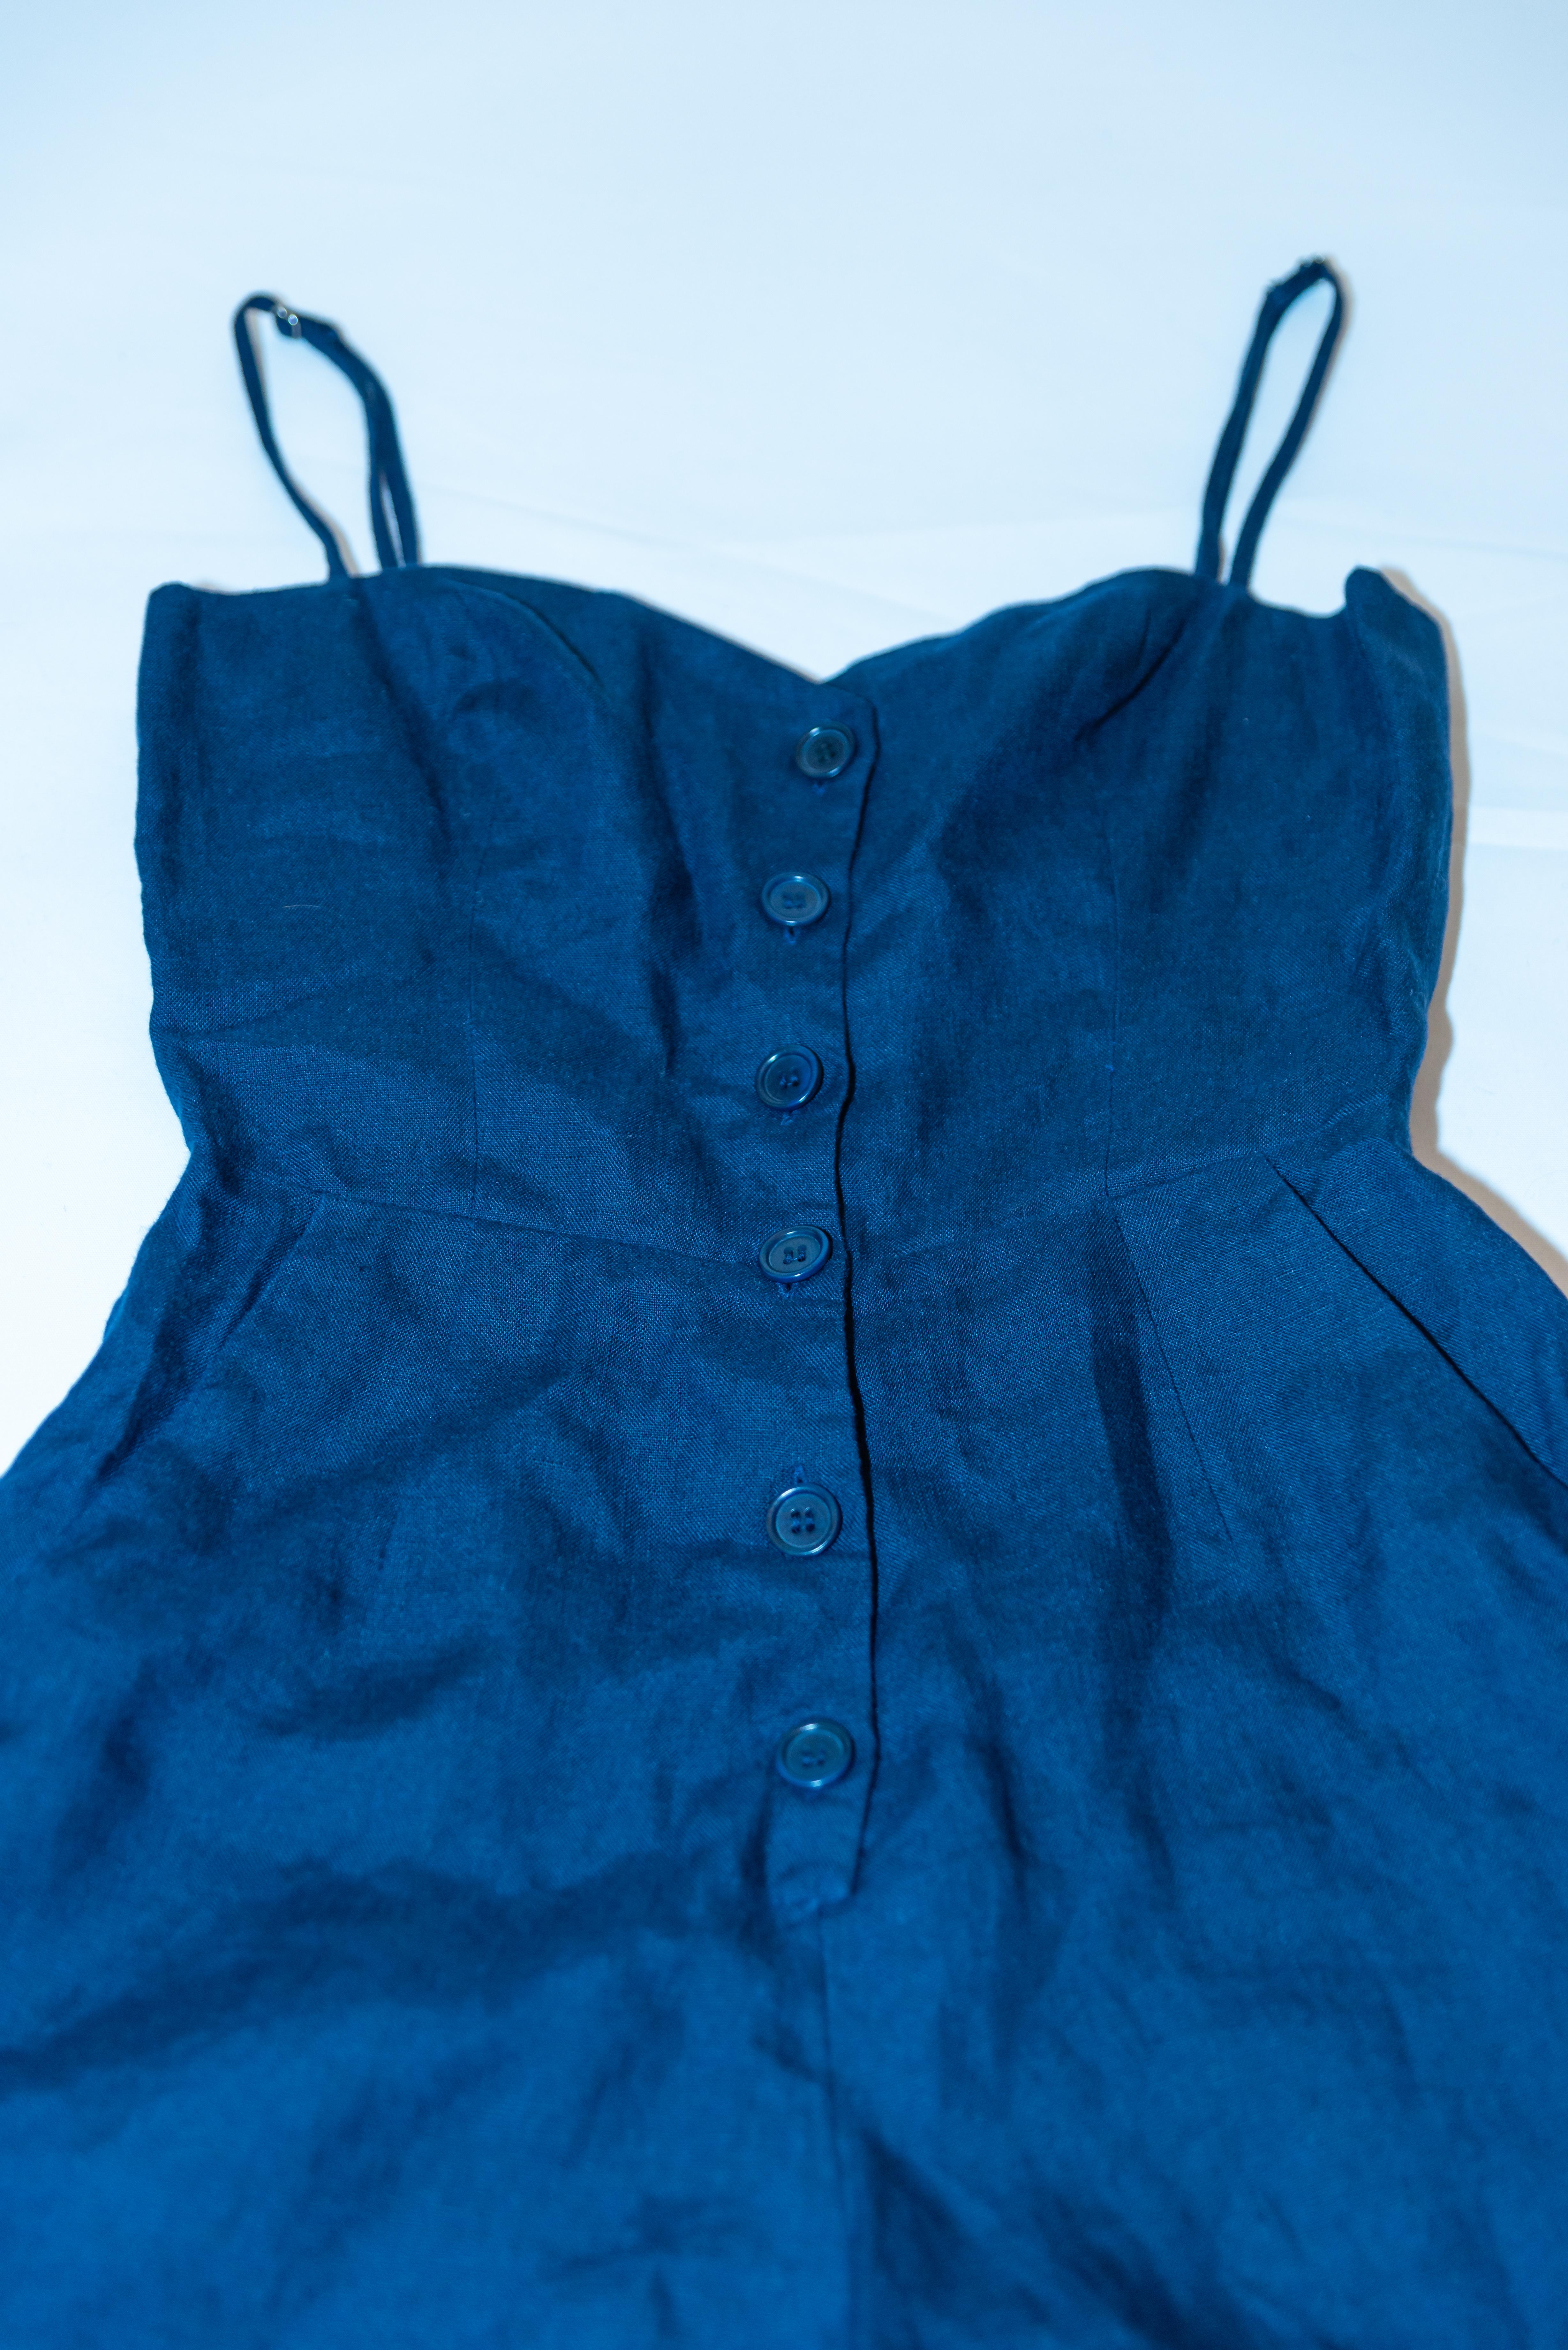 Women's or Men's Blue Linen Playsuit by Reformation For Sale